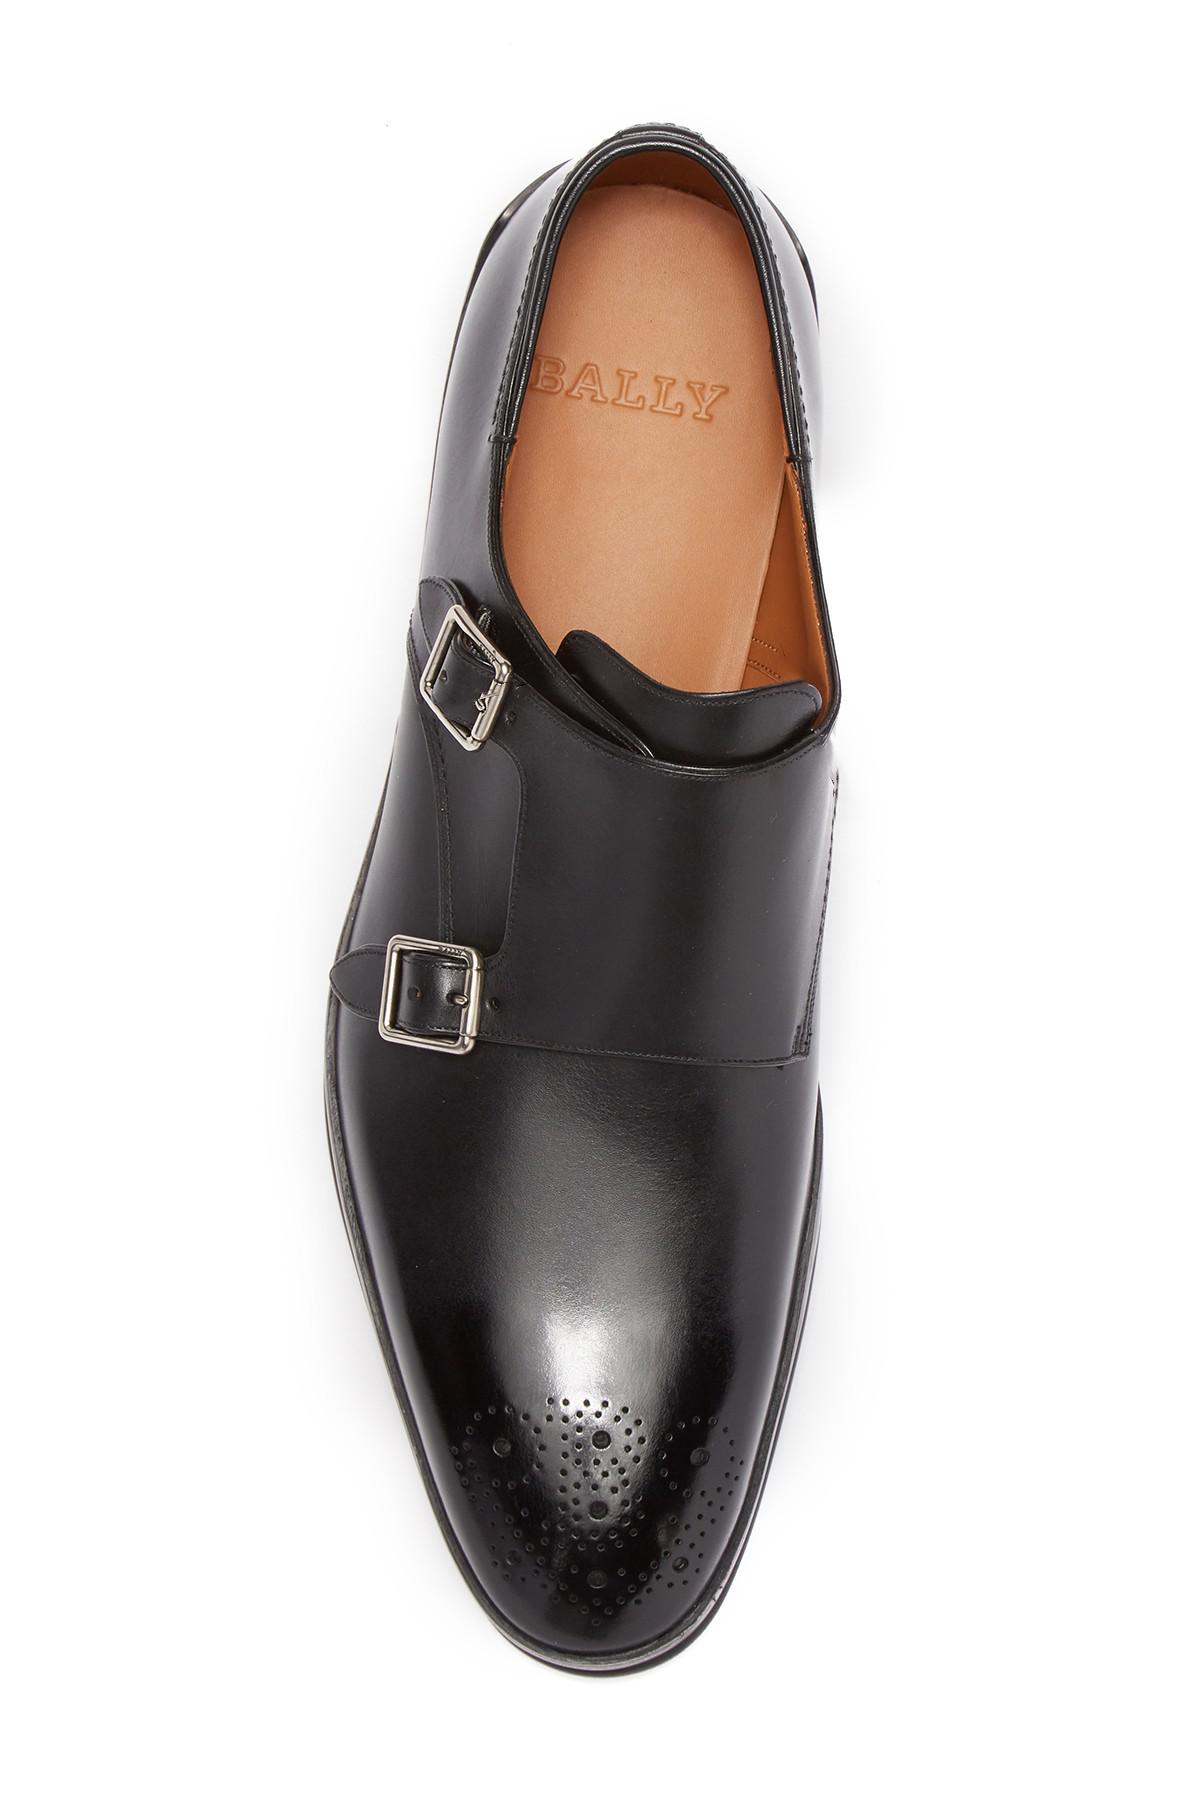 Bally Rempton Double Monk Strap Leather Loafer in Black for Men - Lyst